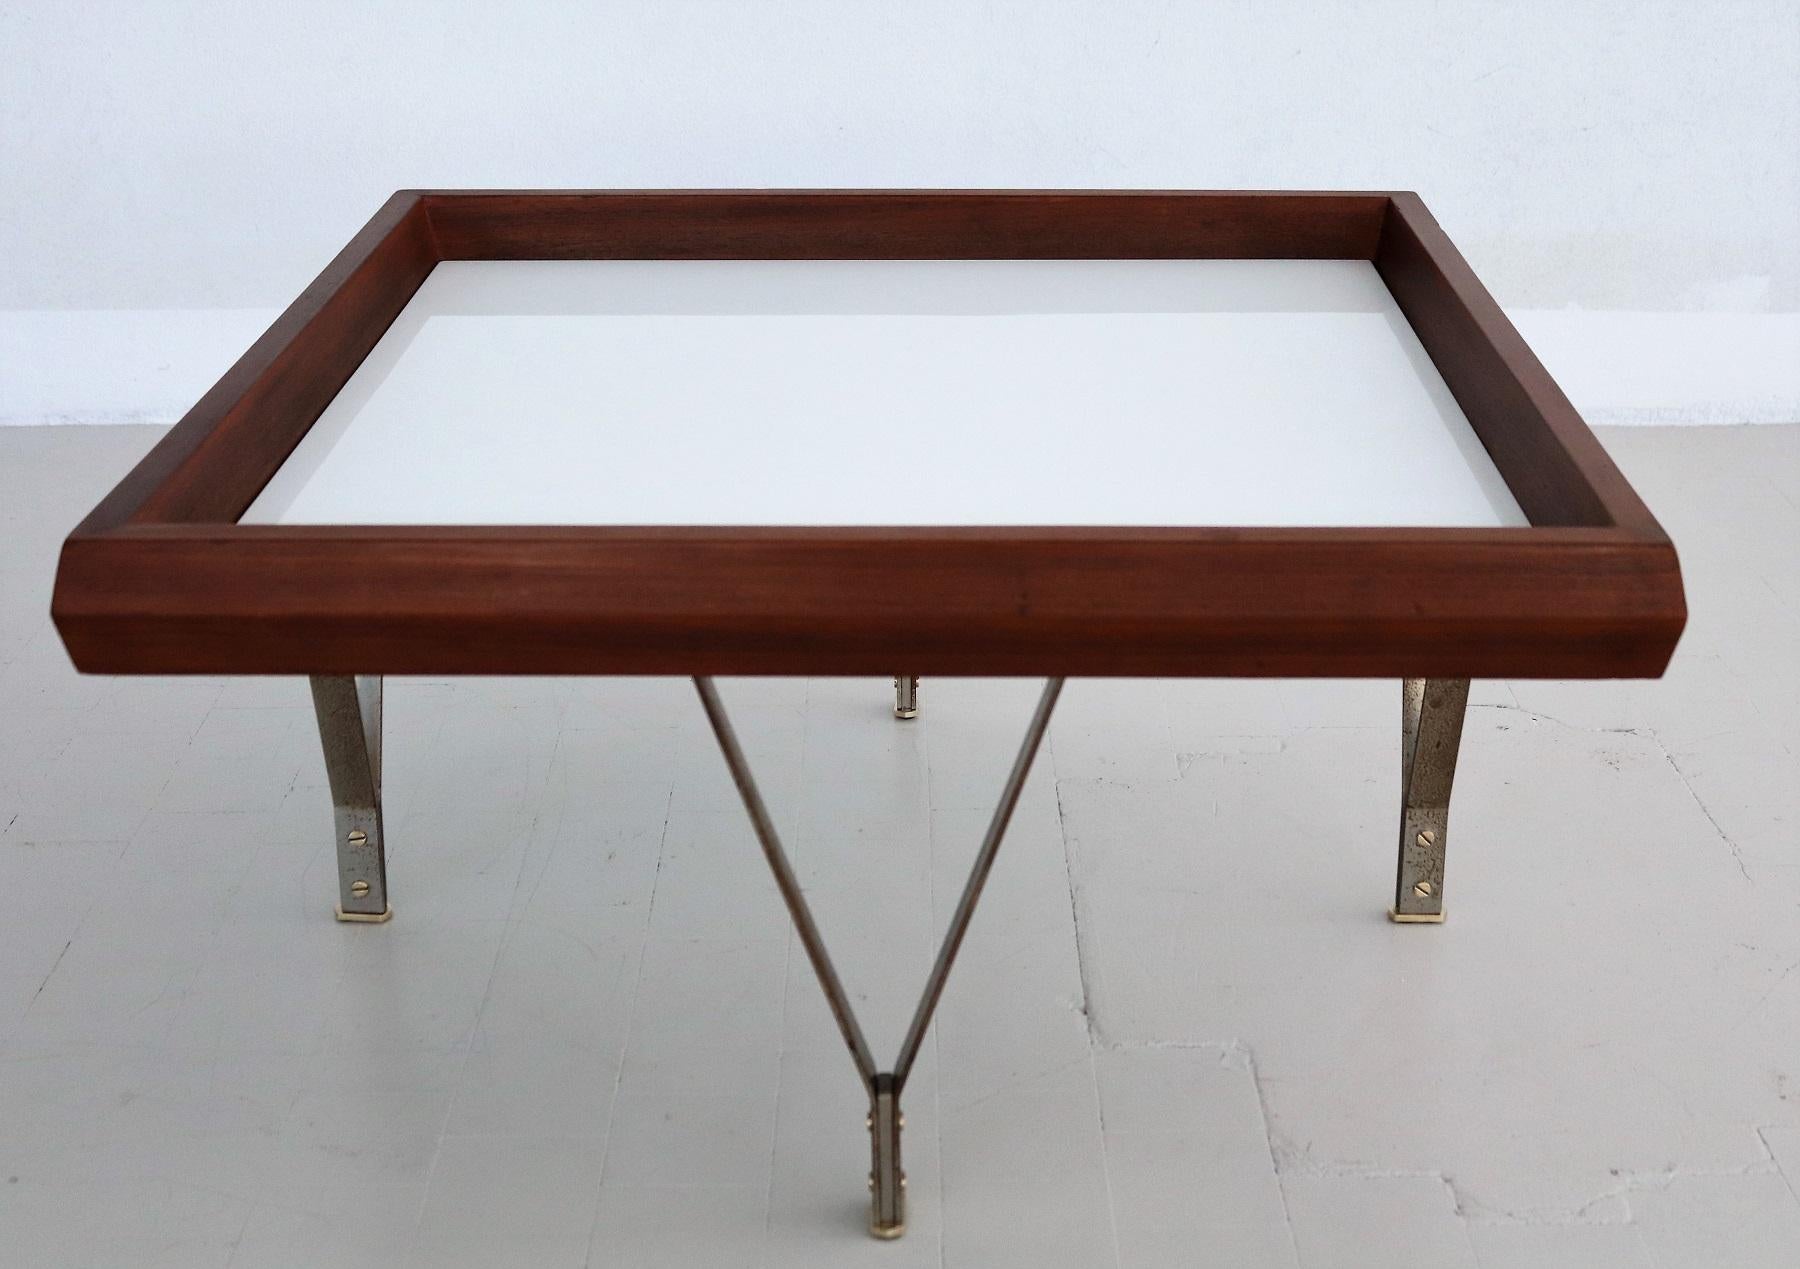 Italian Midcentury Modern Coffee Table in Mahogany and Glass, 1960s 10